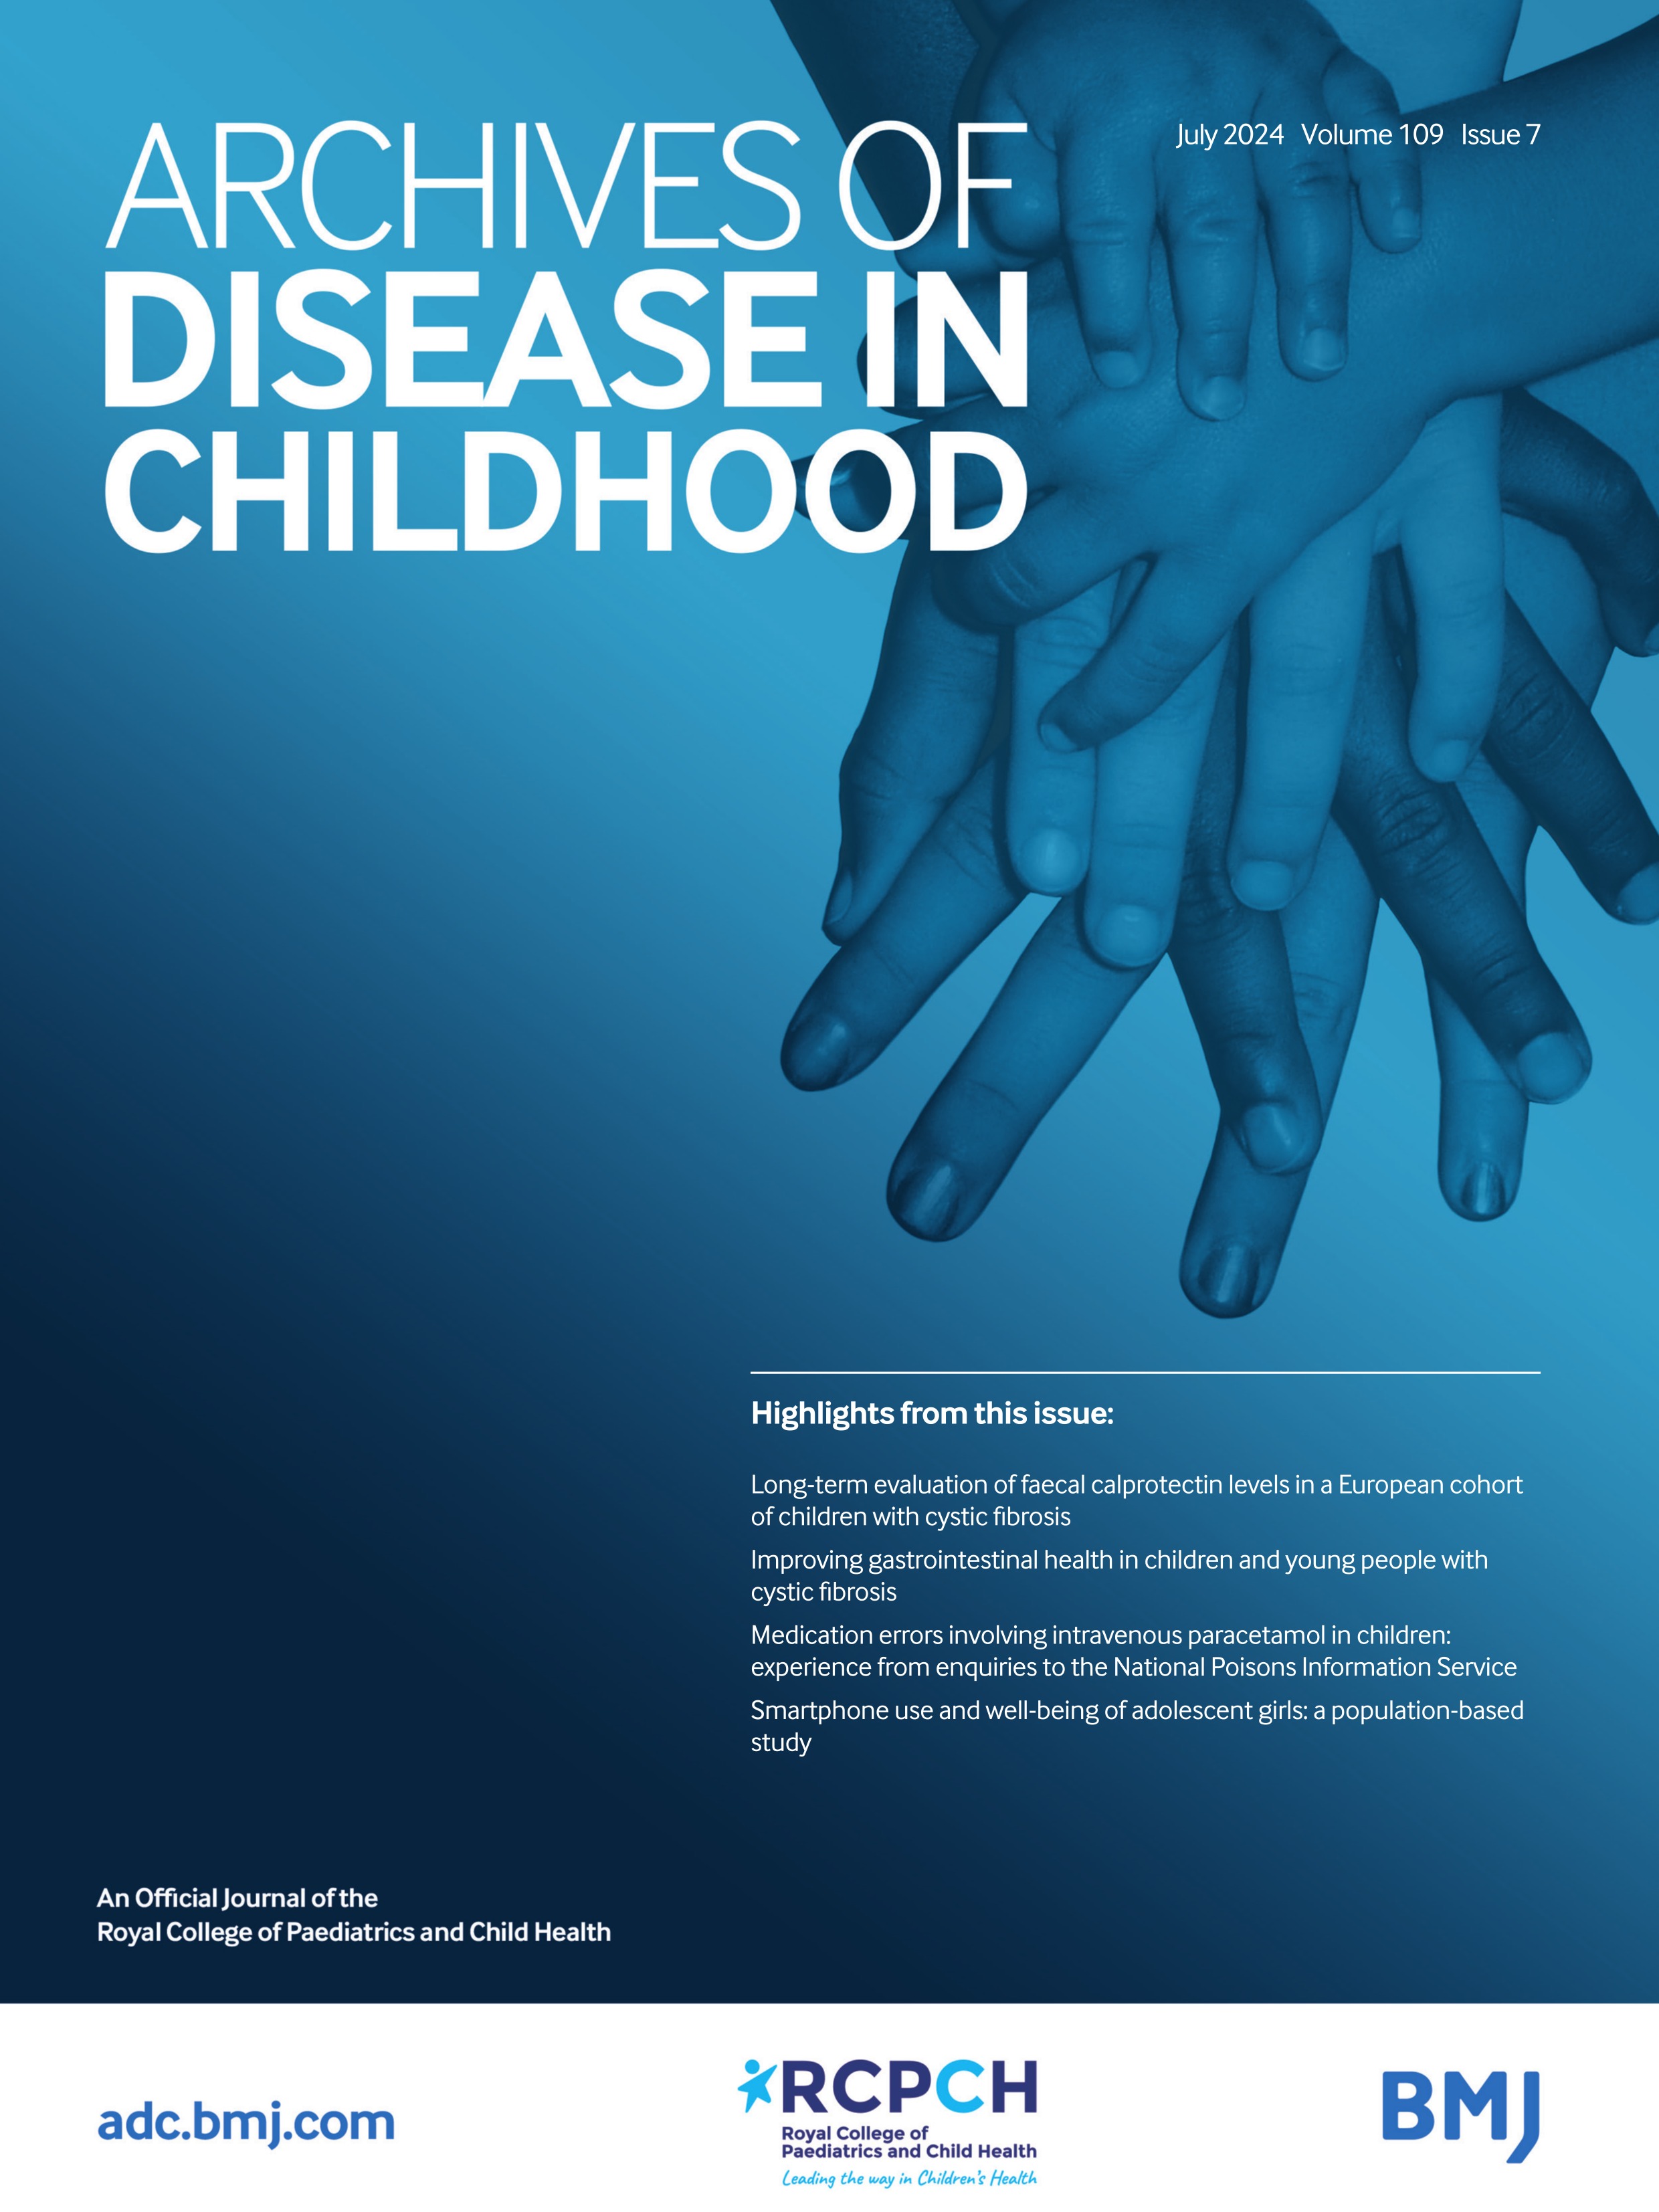 Long-term evaluation of faecal calprotectin levels in a European cohort of children with cystic fibrosis